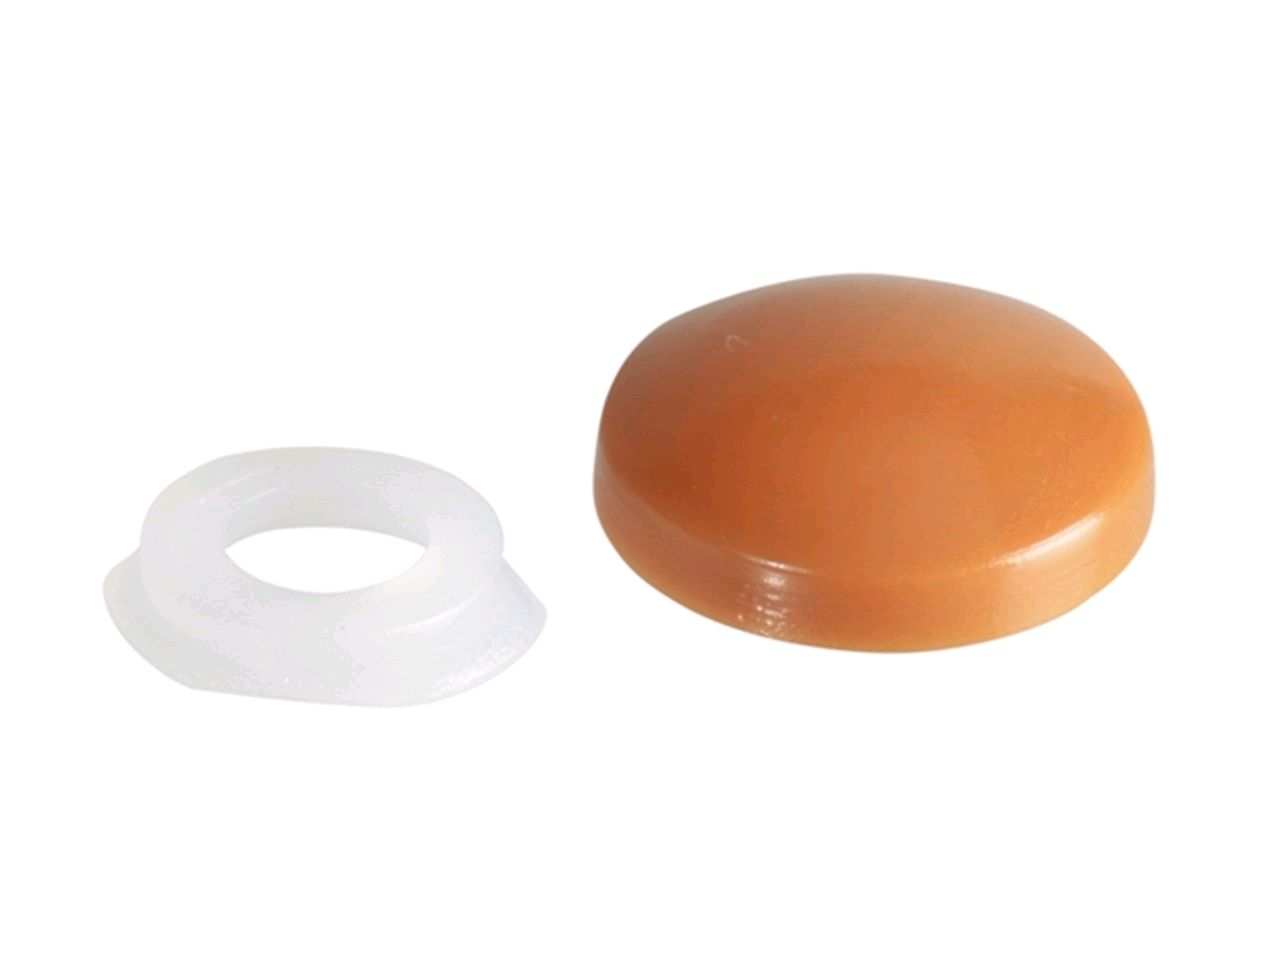 Forgefix No. 6-8's Plastic Domed Cover Caps (Pack of 20) Light Brown 